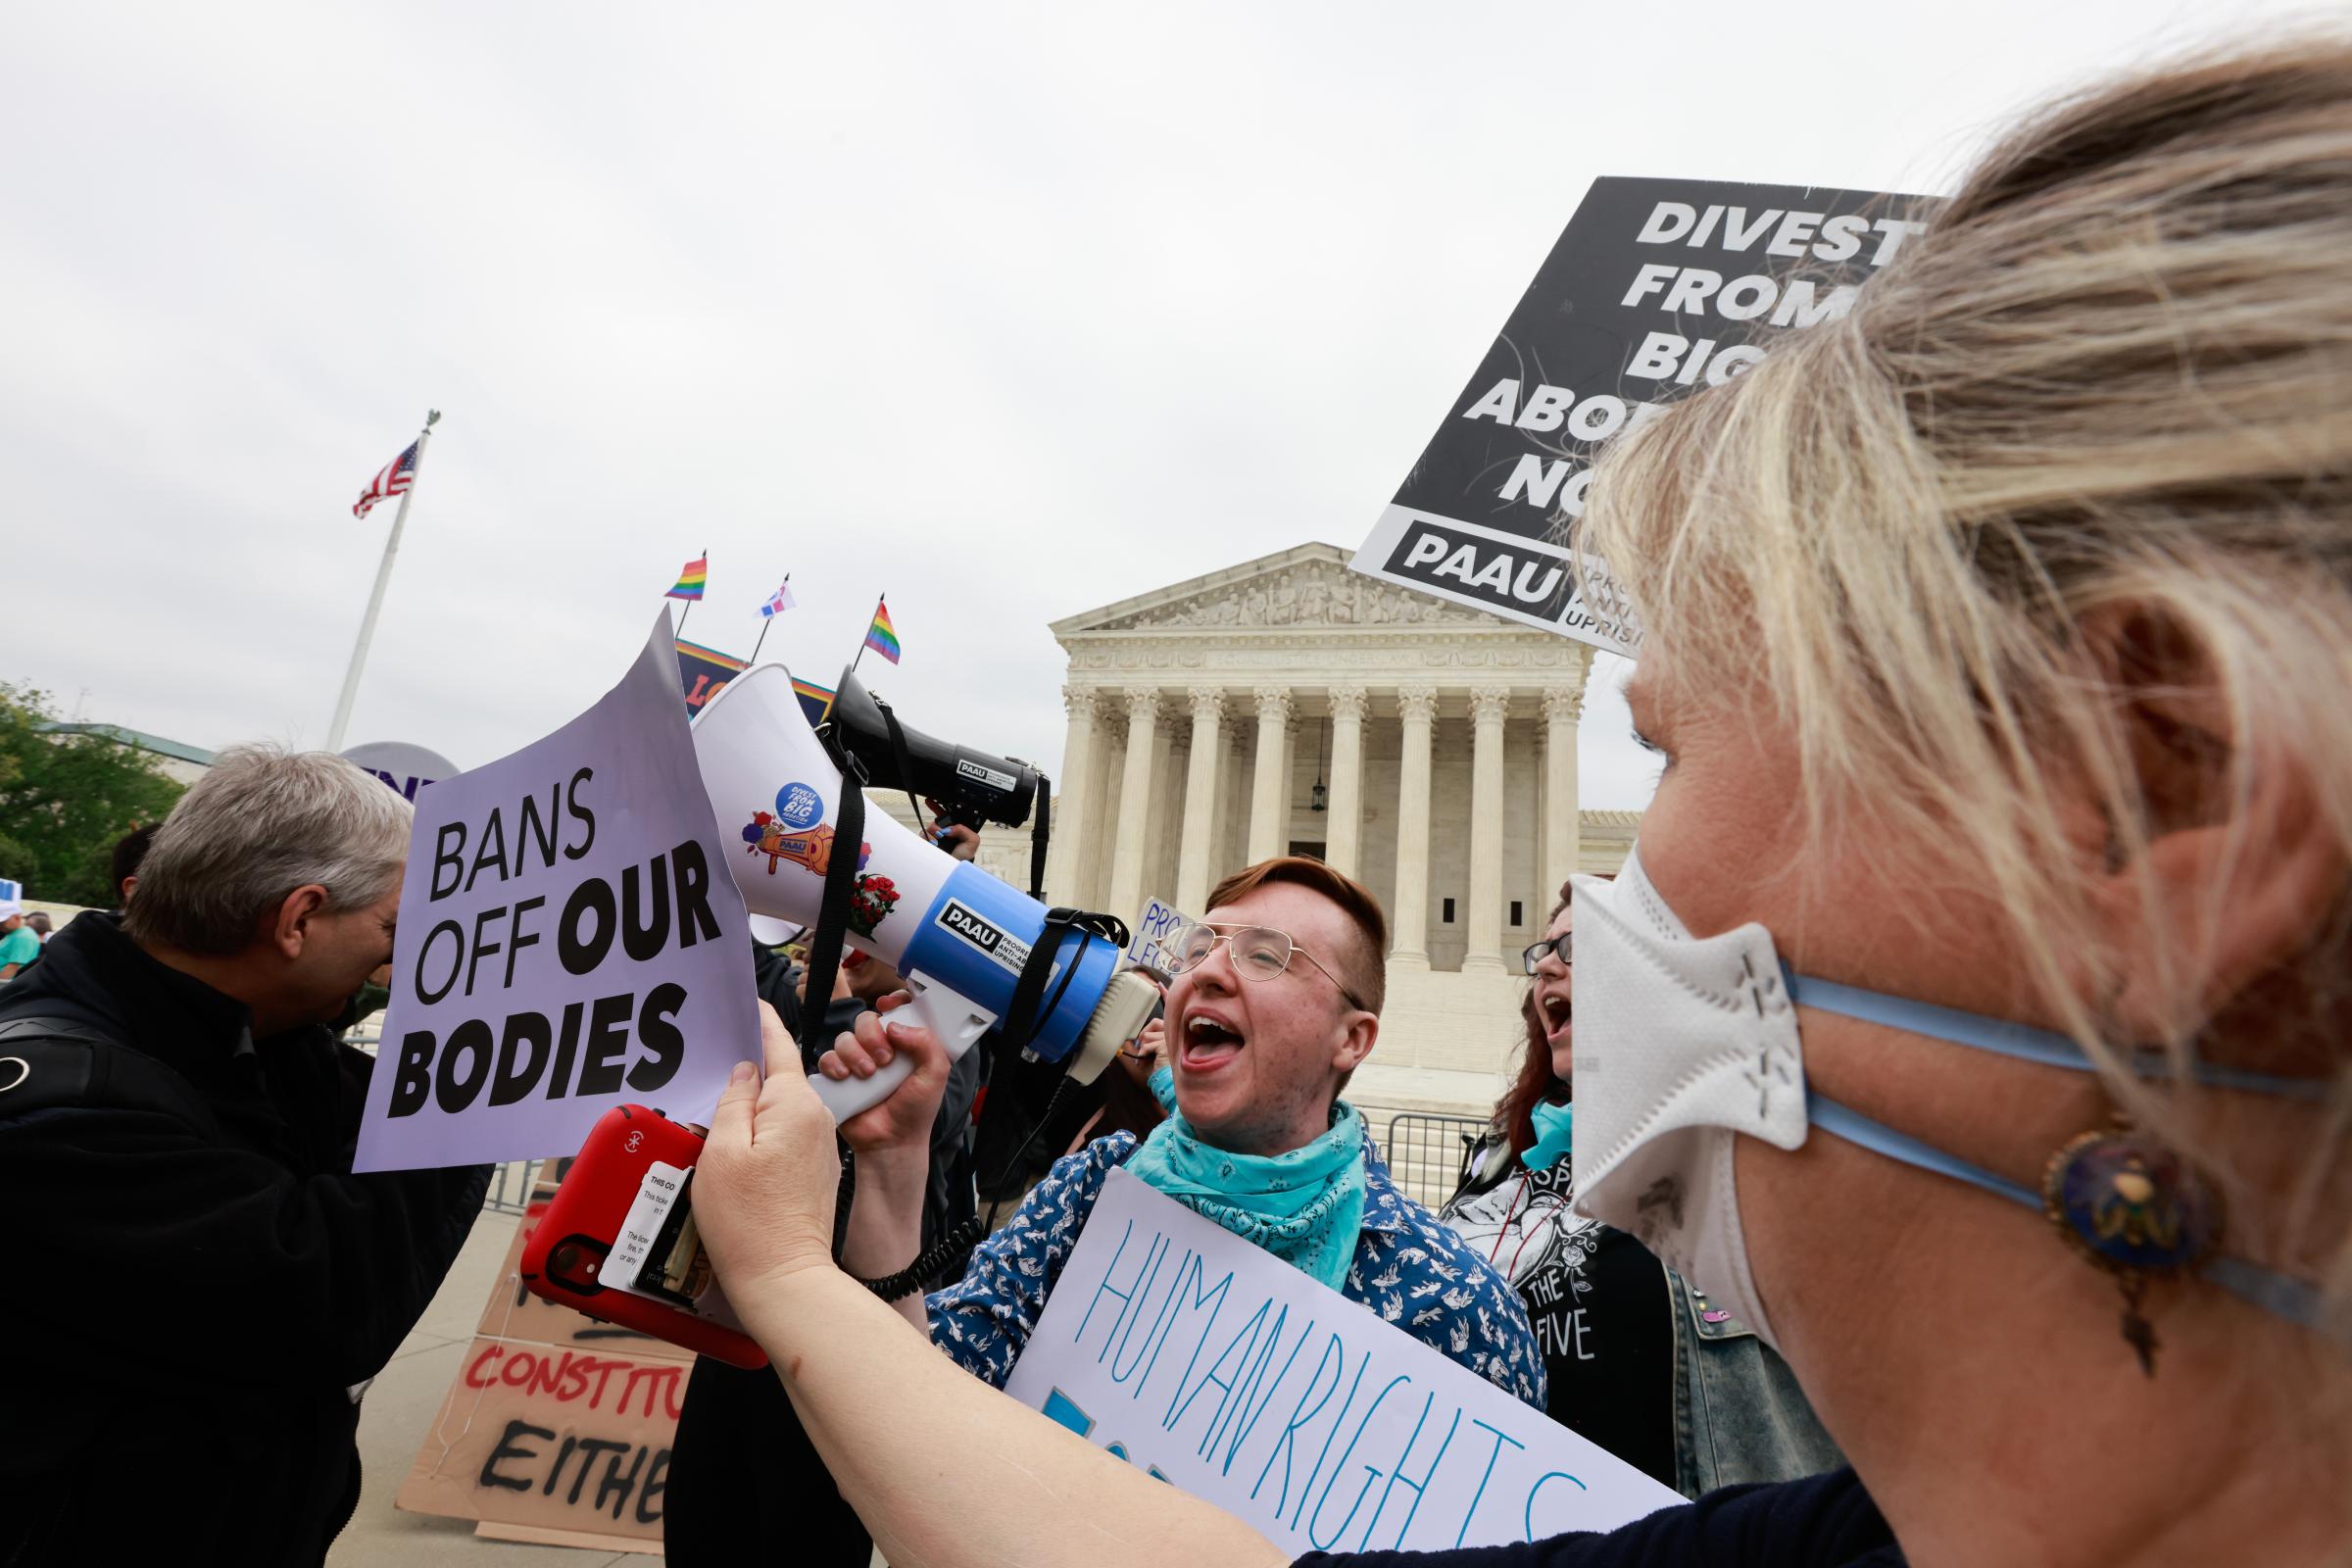 Roe v. Wade Overturned - Pro-choice tight protestors confront Anti-abortion...